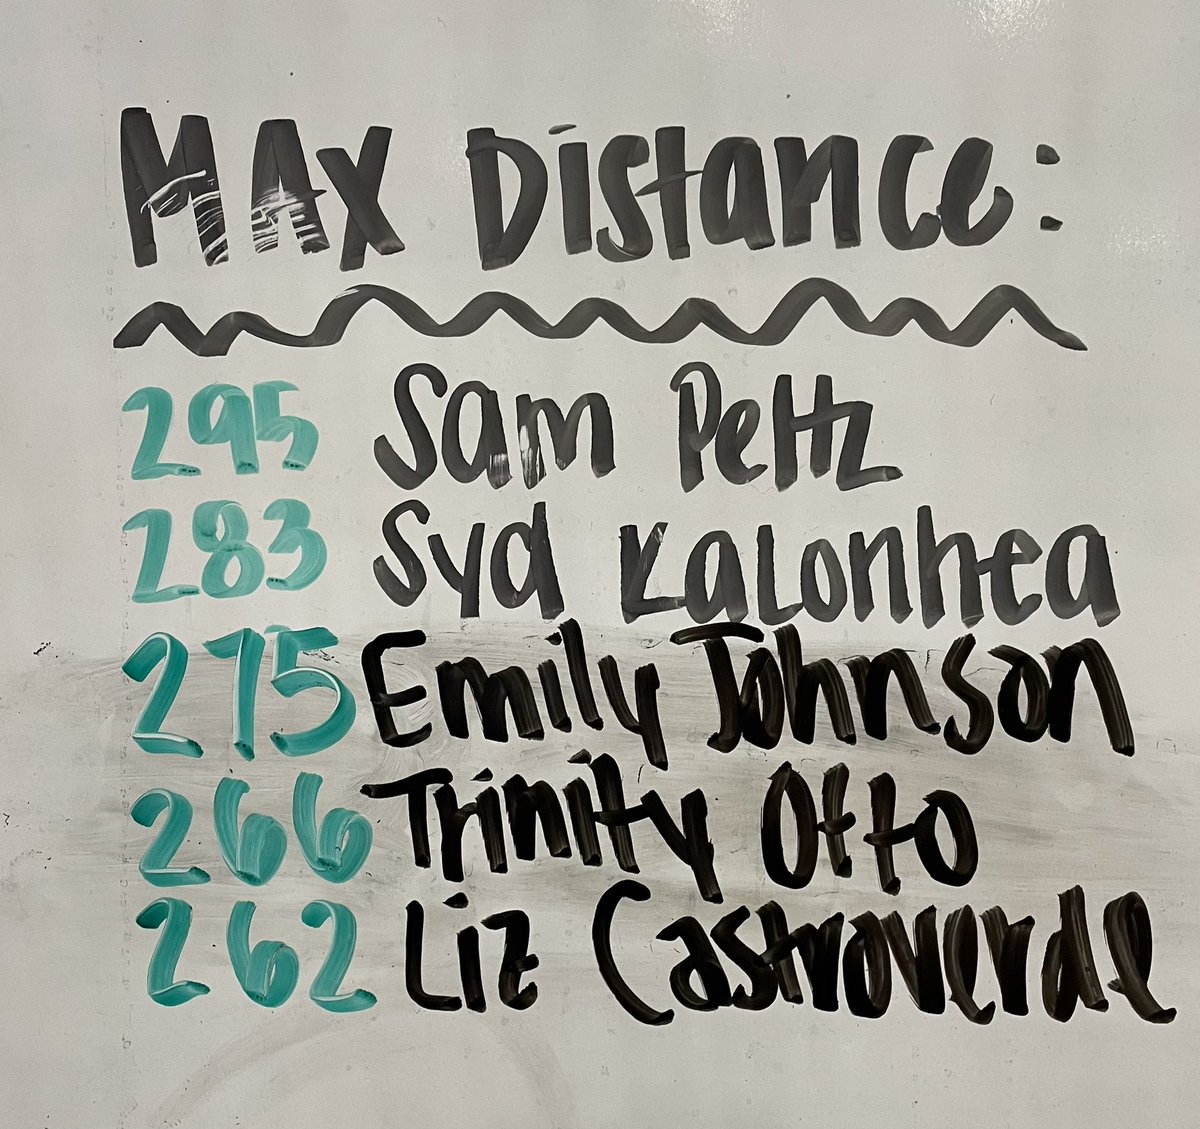 Had a great hitting day today and PR'd on both exit velocity and distance while making it on to @deltamilwaukee all time board for both!! Exit Velocity: 81.6 mph Distance: 275 ft @FastpitchDelta